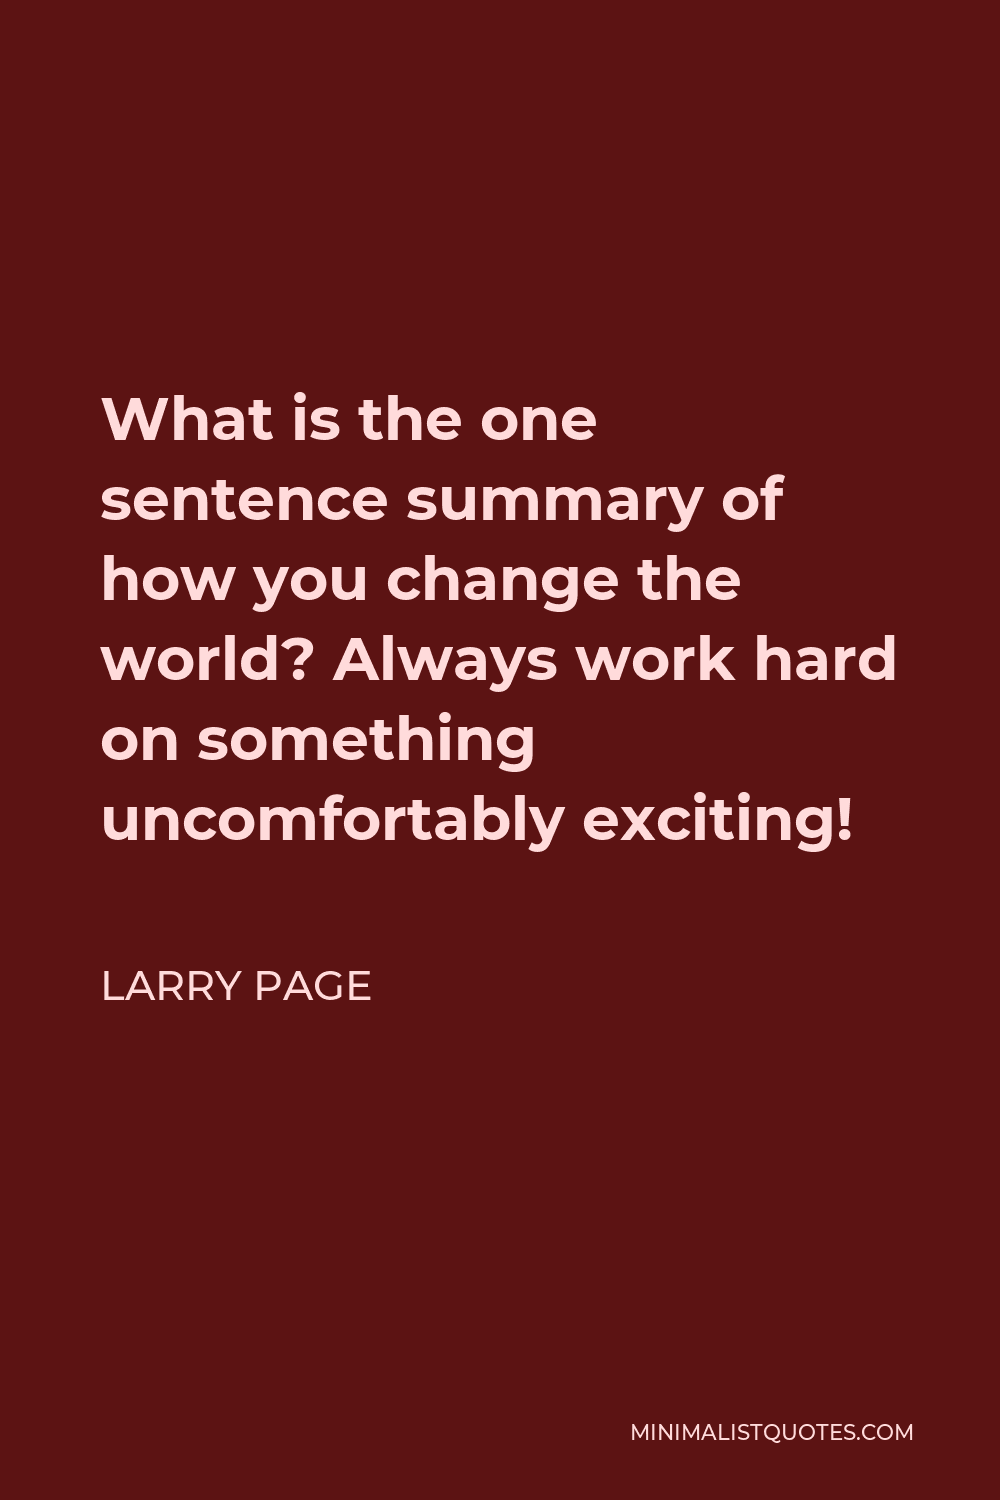 Larry Page Quote - What is the one sentence summary of how you change the world? Always work hard on something uncomfortably exciting!